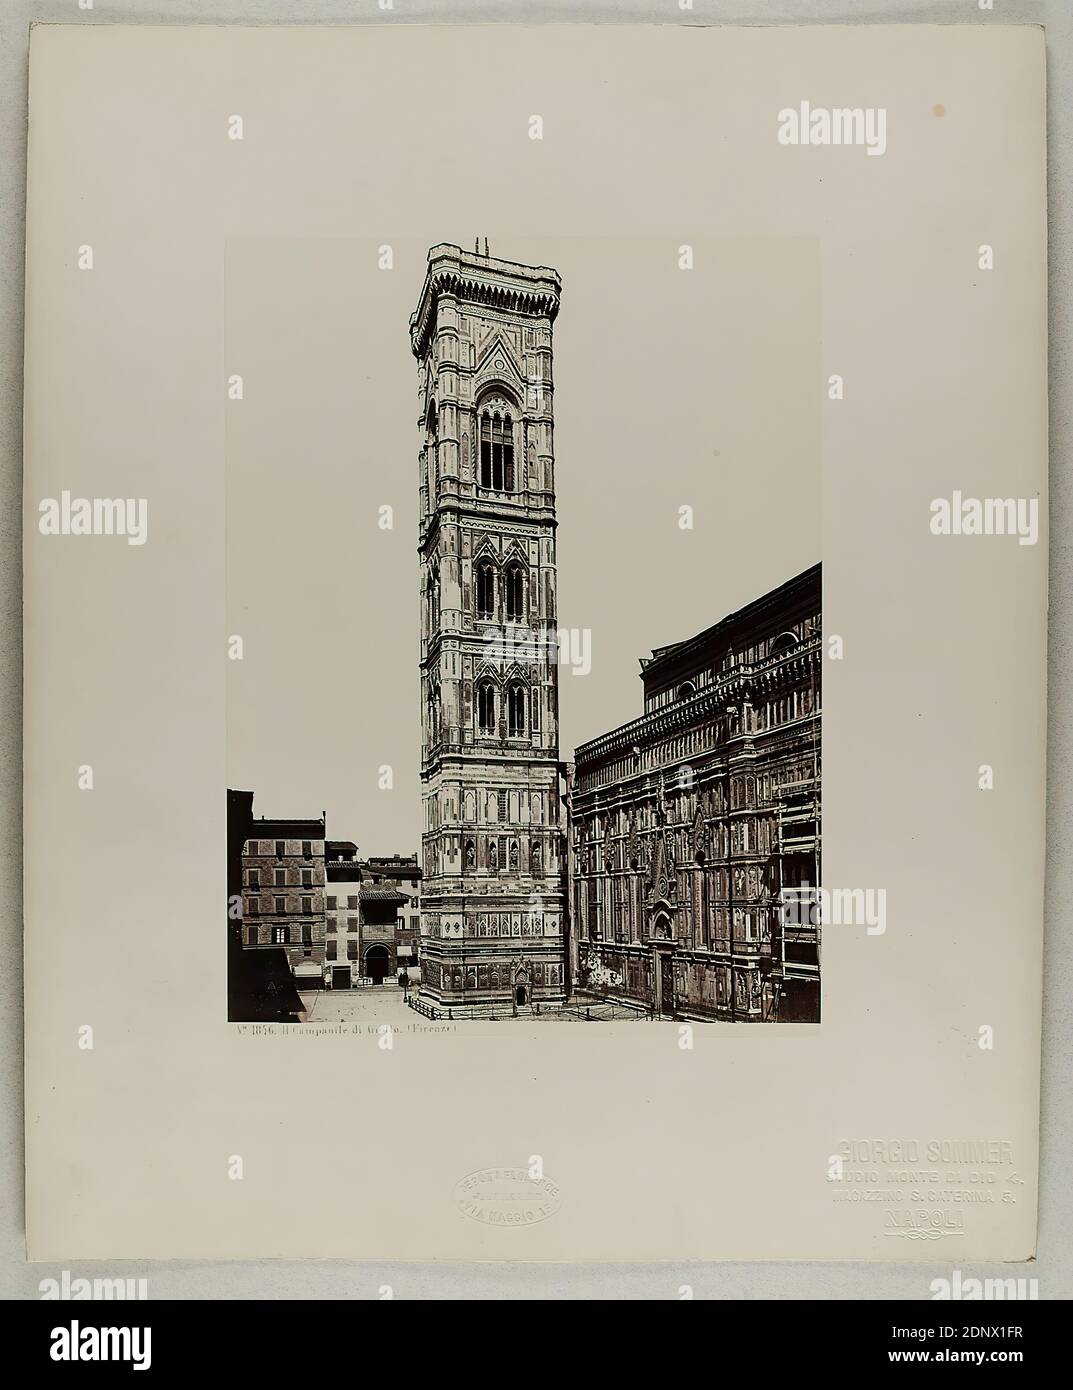 Giorgio Sommer, Il Campanile di Giotto (Firenze), albumin paper, black and white positive process, sheet size: height: 24.40 cm; width: 18.20 cm, inscribed: recto and: exposed: No. 1846. Il Campanile di Giotto. (Firenze), dry stamp: recto and on the cardboard: GIORGIO SOMMER, STUDIO MONTE DI DIO 4, MAGAZZINO S. CATERINA 5, NAPOLI, as well as J. BRECKER, DEPOT A FLORENCE, VIA MAGGIO 15, stamp: on the verso of the cardboard: inventory, travel photography, architectural photography, exterior construction of a church, church tower Stock Photo